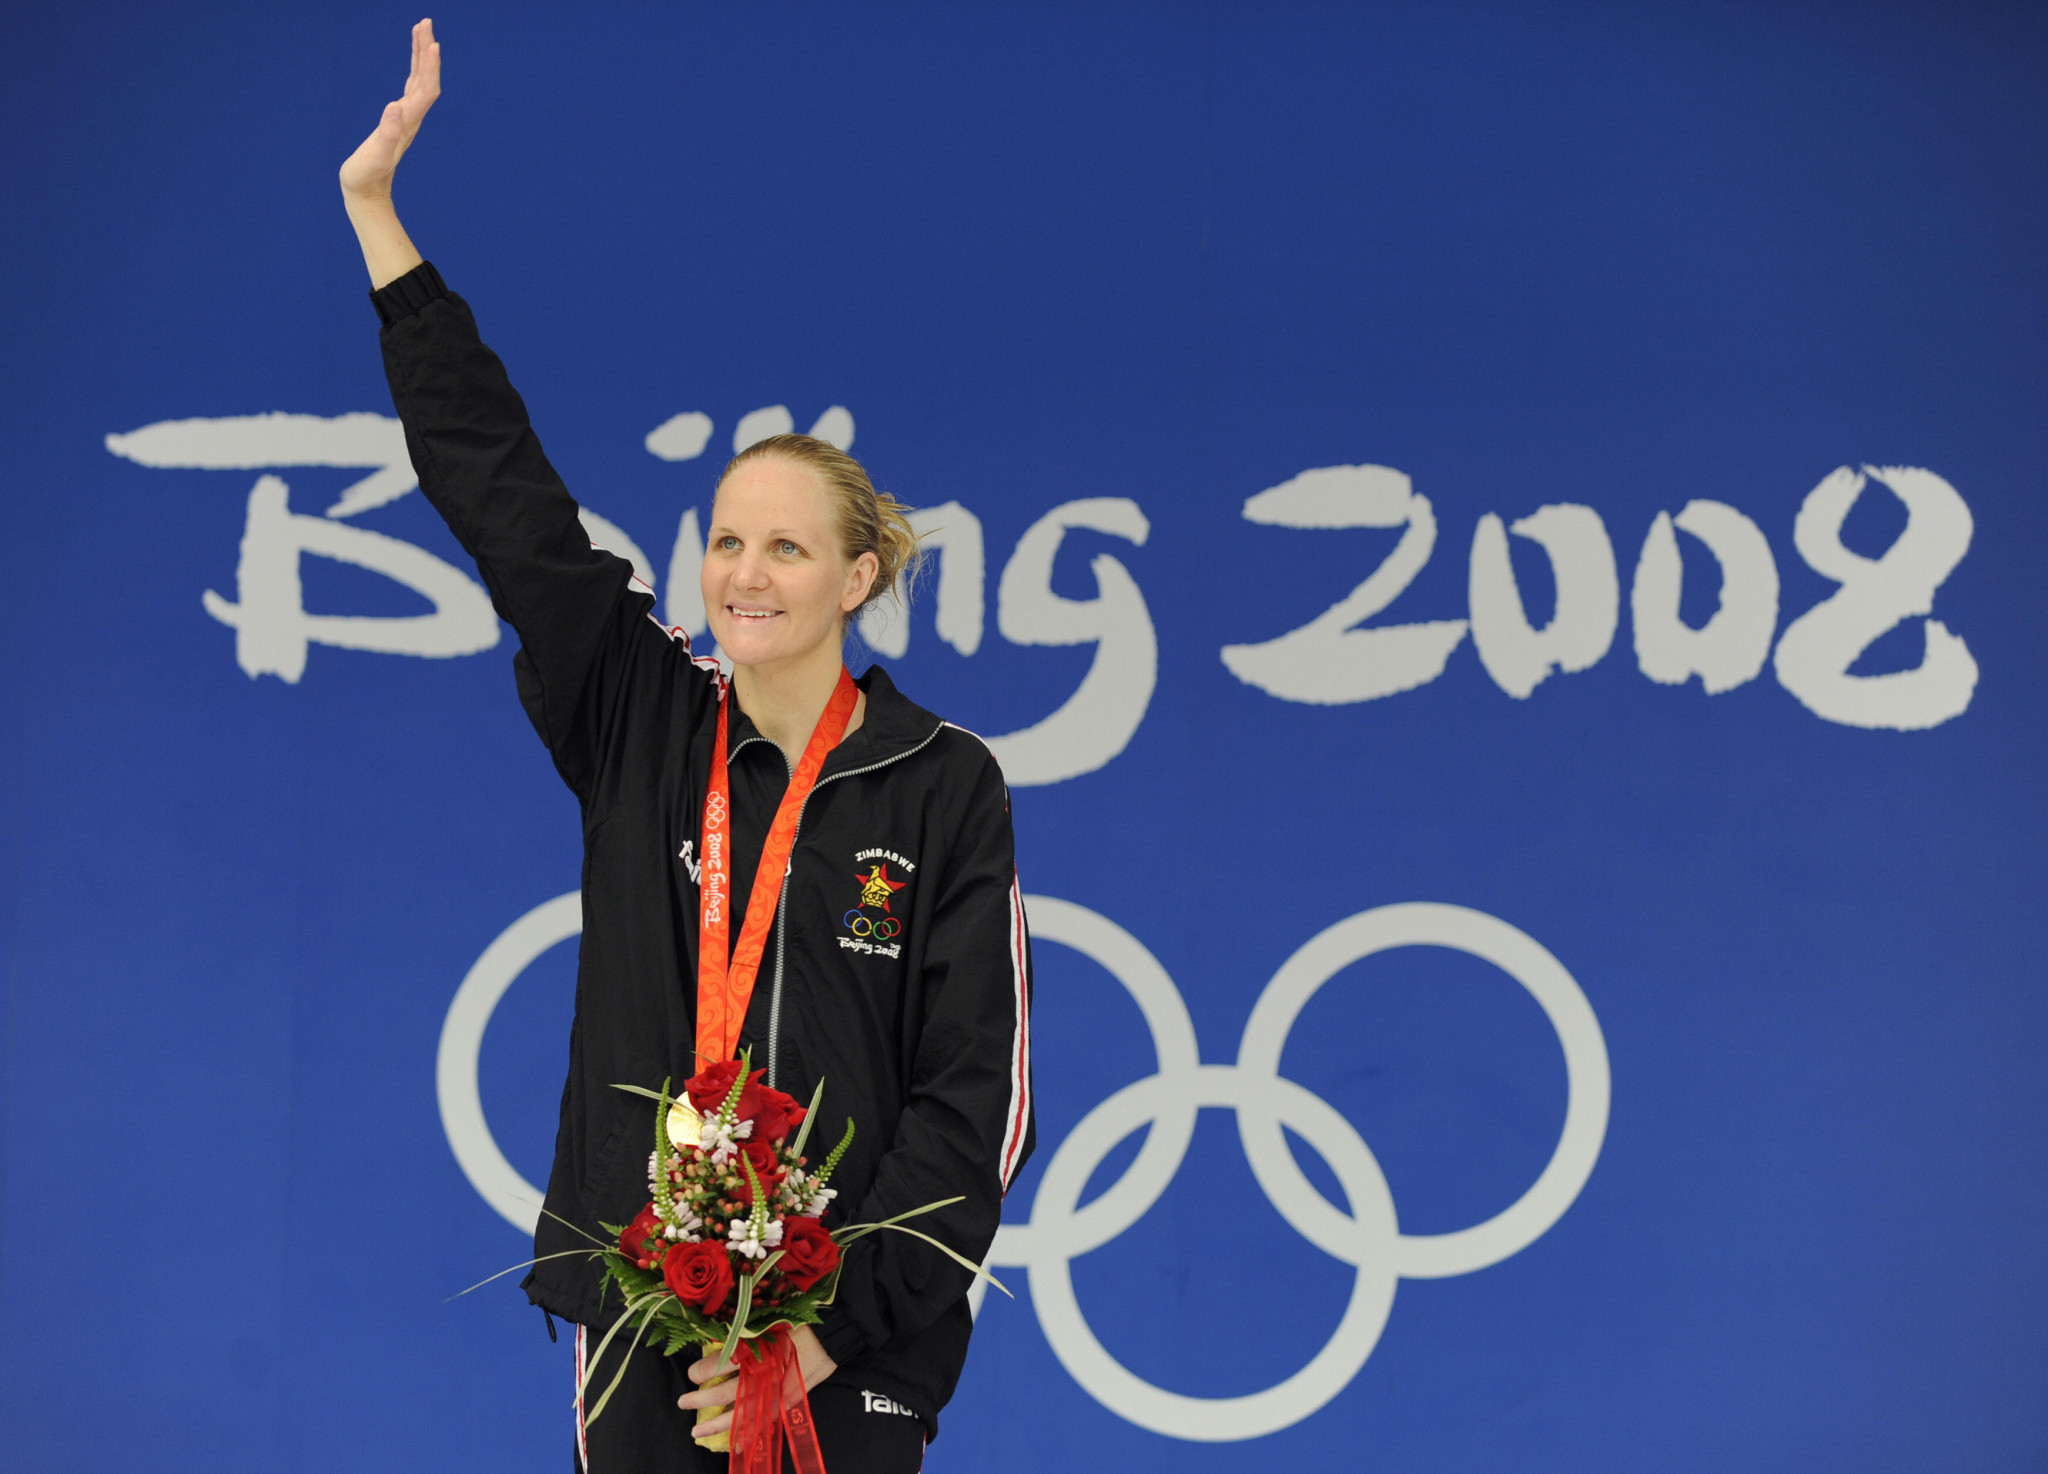 Thabani Gonye was Chef de Mission for Zimbabwe at Beijing 2008 when swimmer Kirsty Coventry won four medals, including a gold in the 200 metres backstroke, making it the country's most successful Olympic Games ©Getty Images